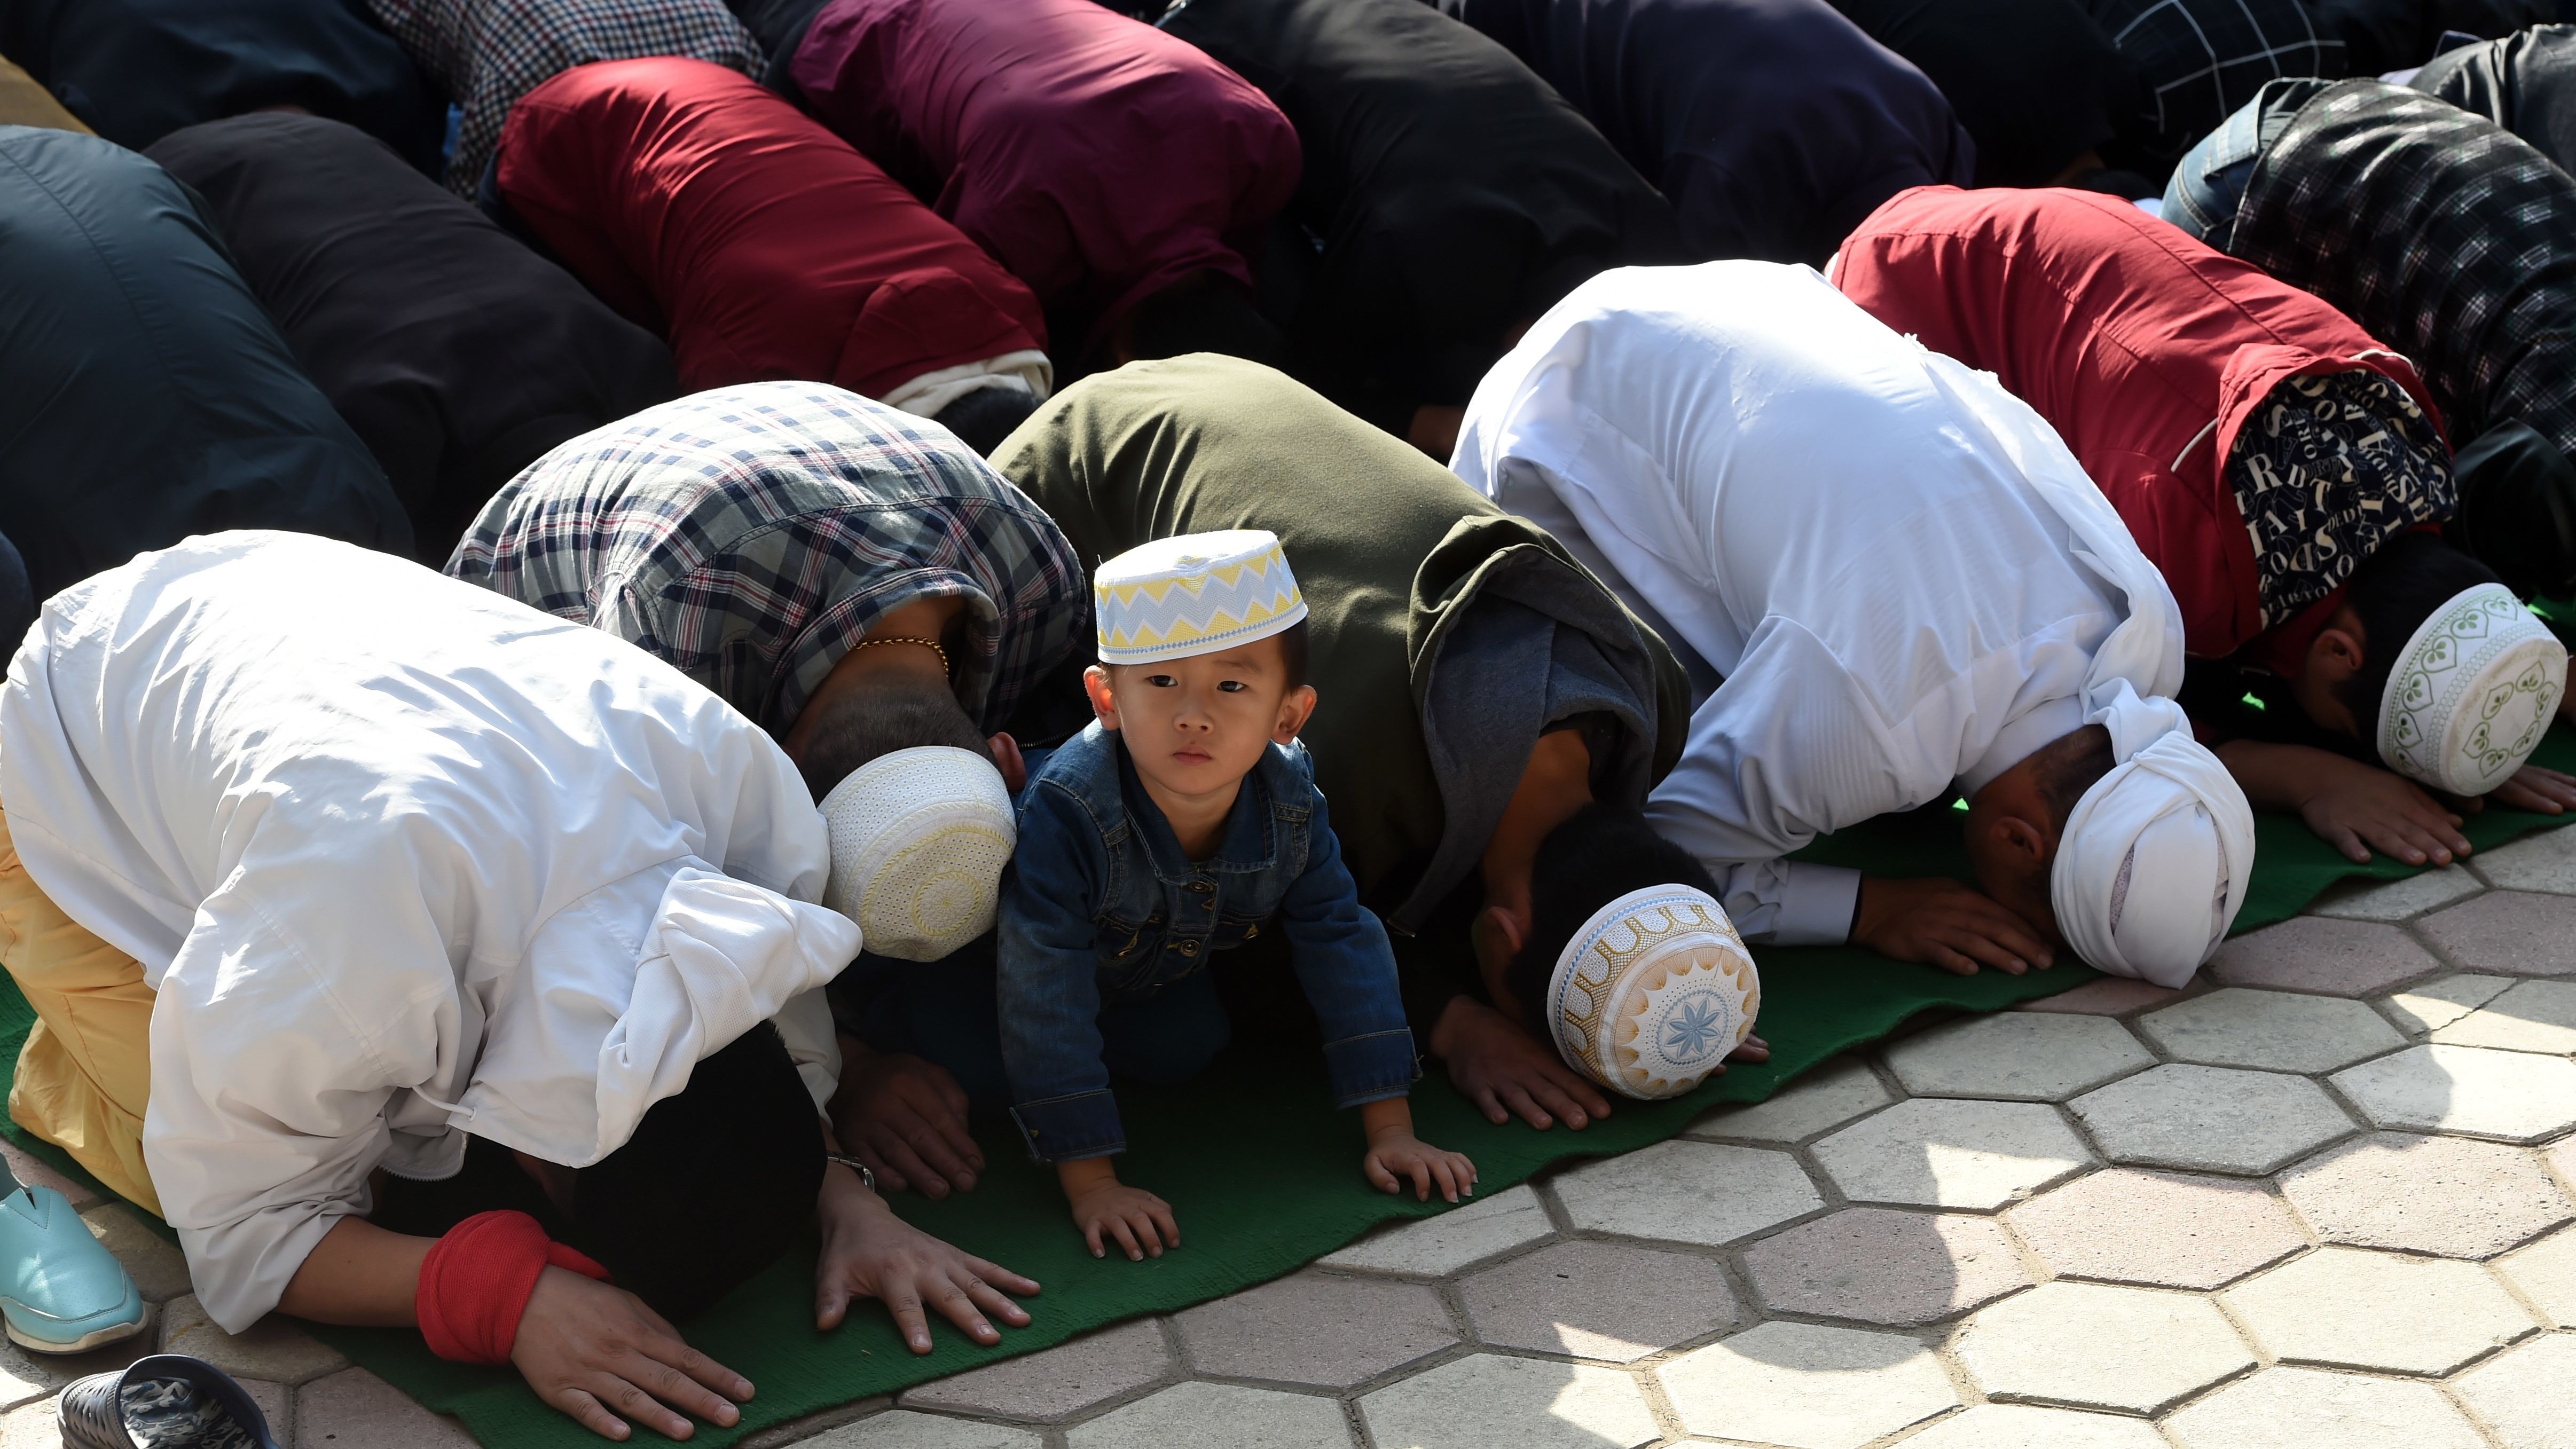 Chinese Muslims have faced restrictions on traditional practices in recent years.